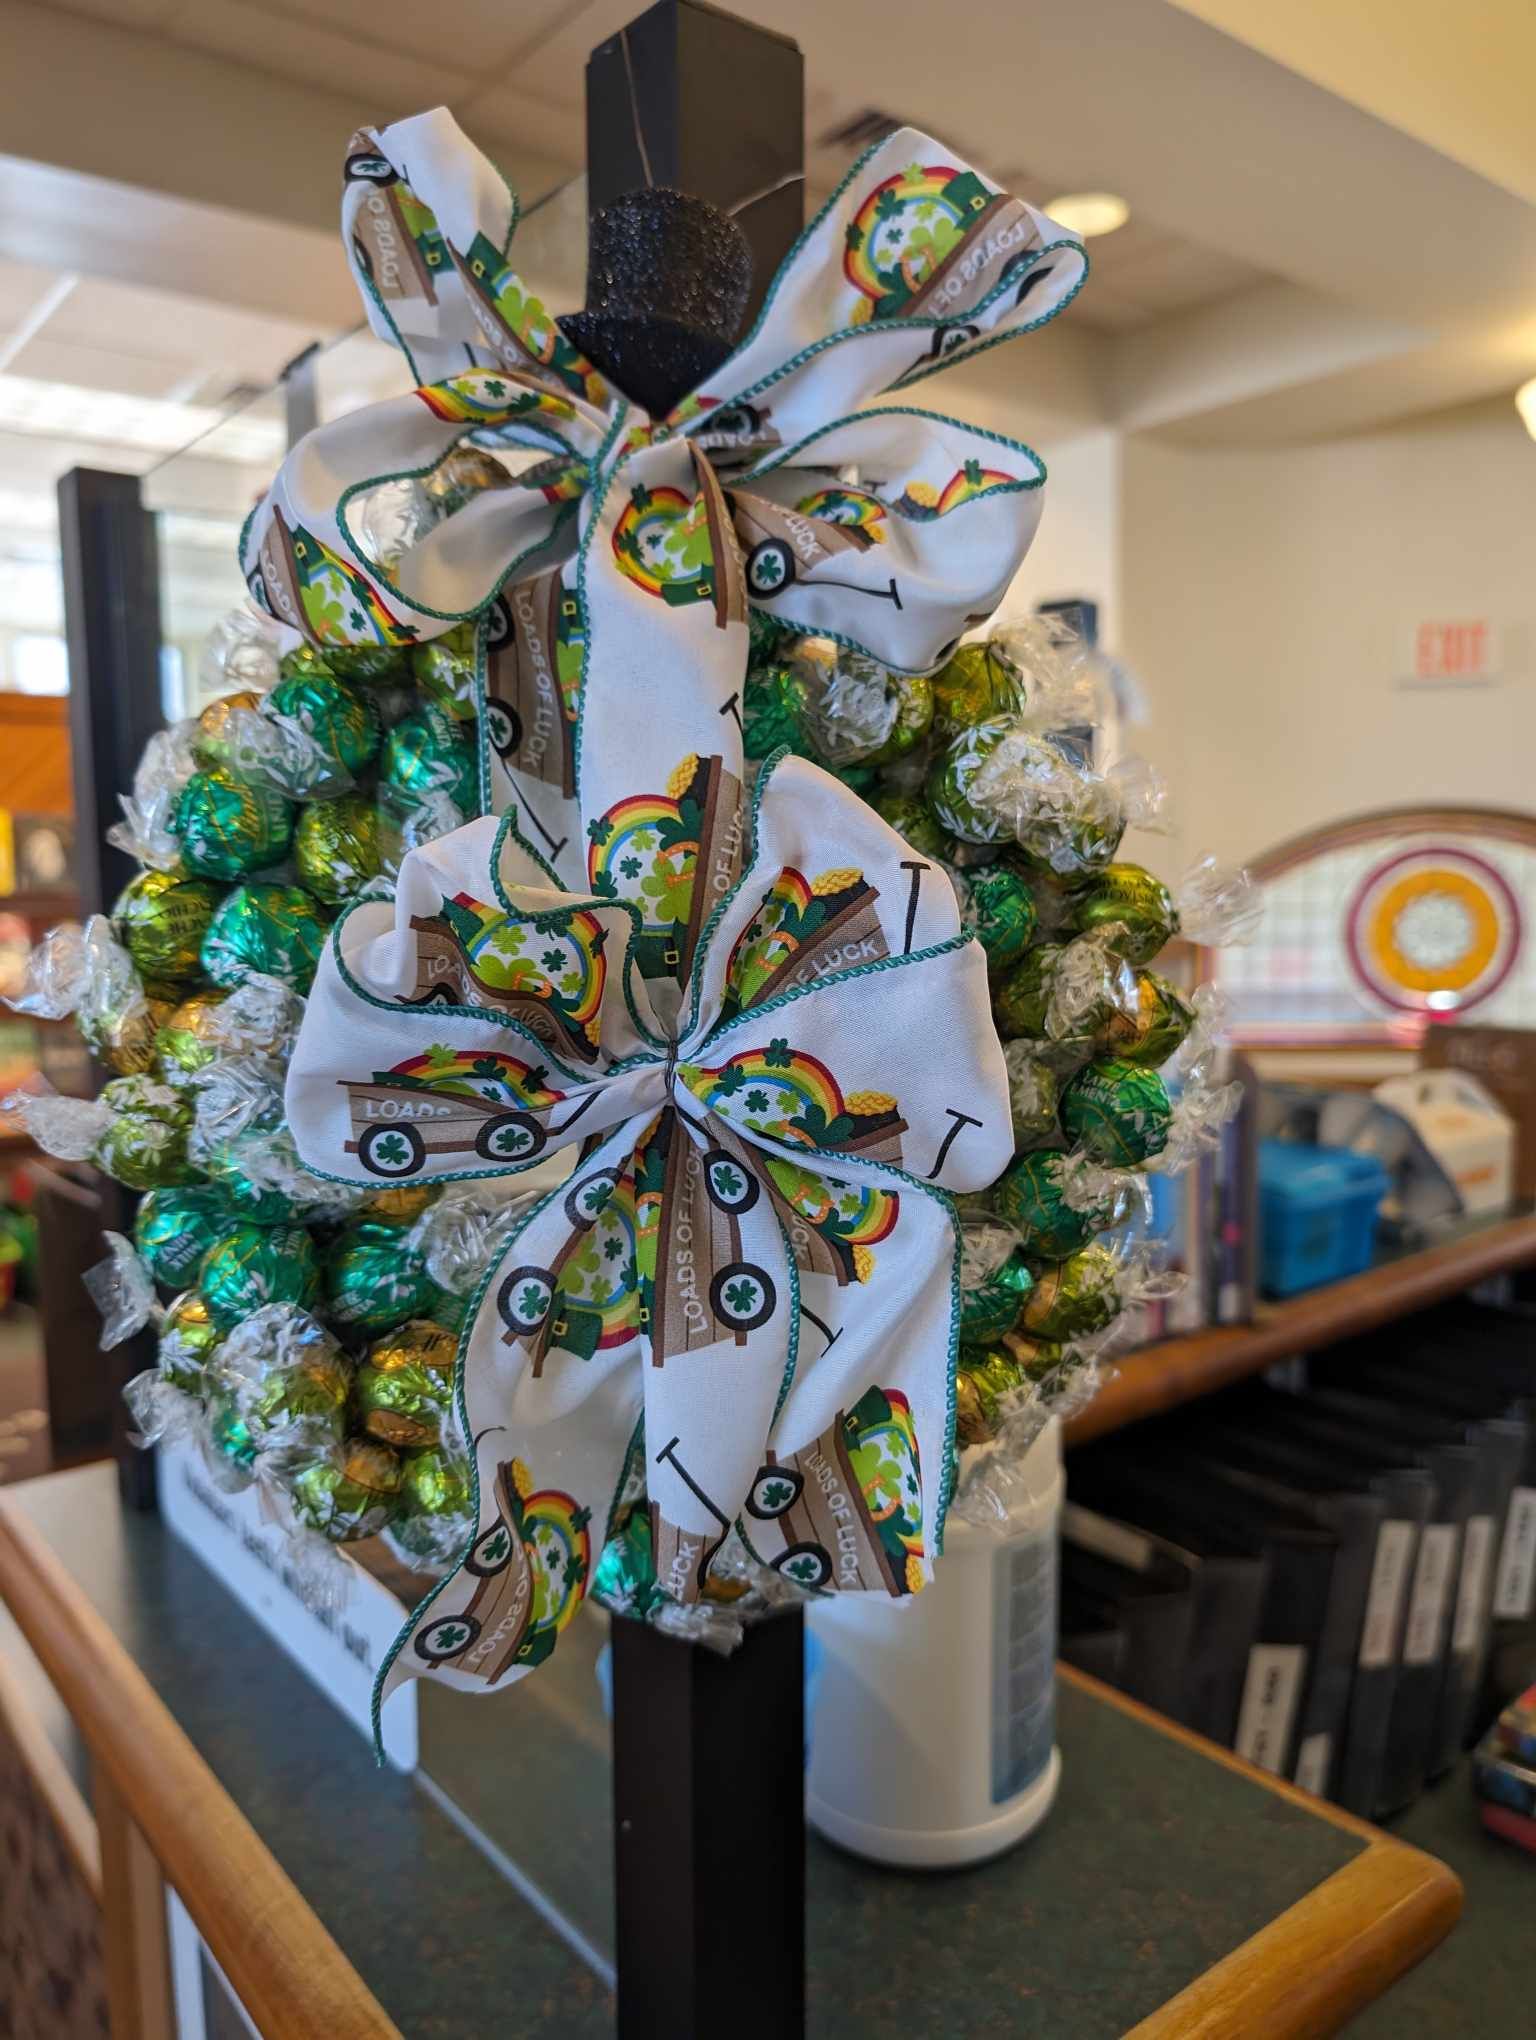 photo of a wreath made of various green wrapped lindt chocolates.